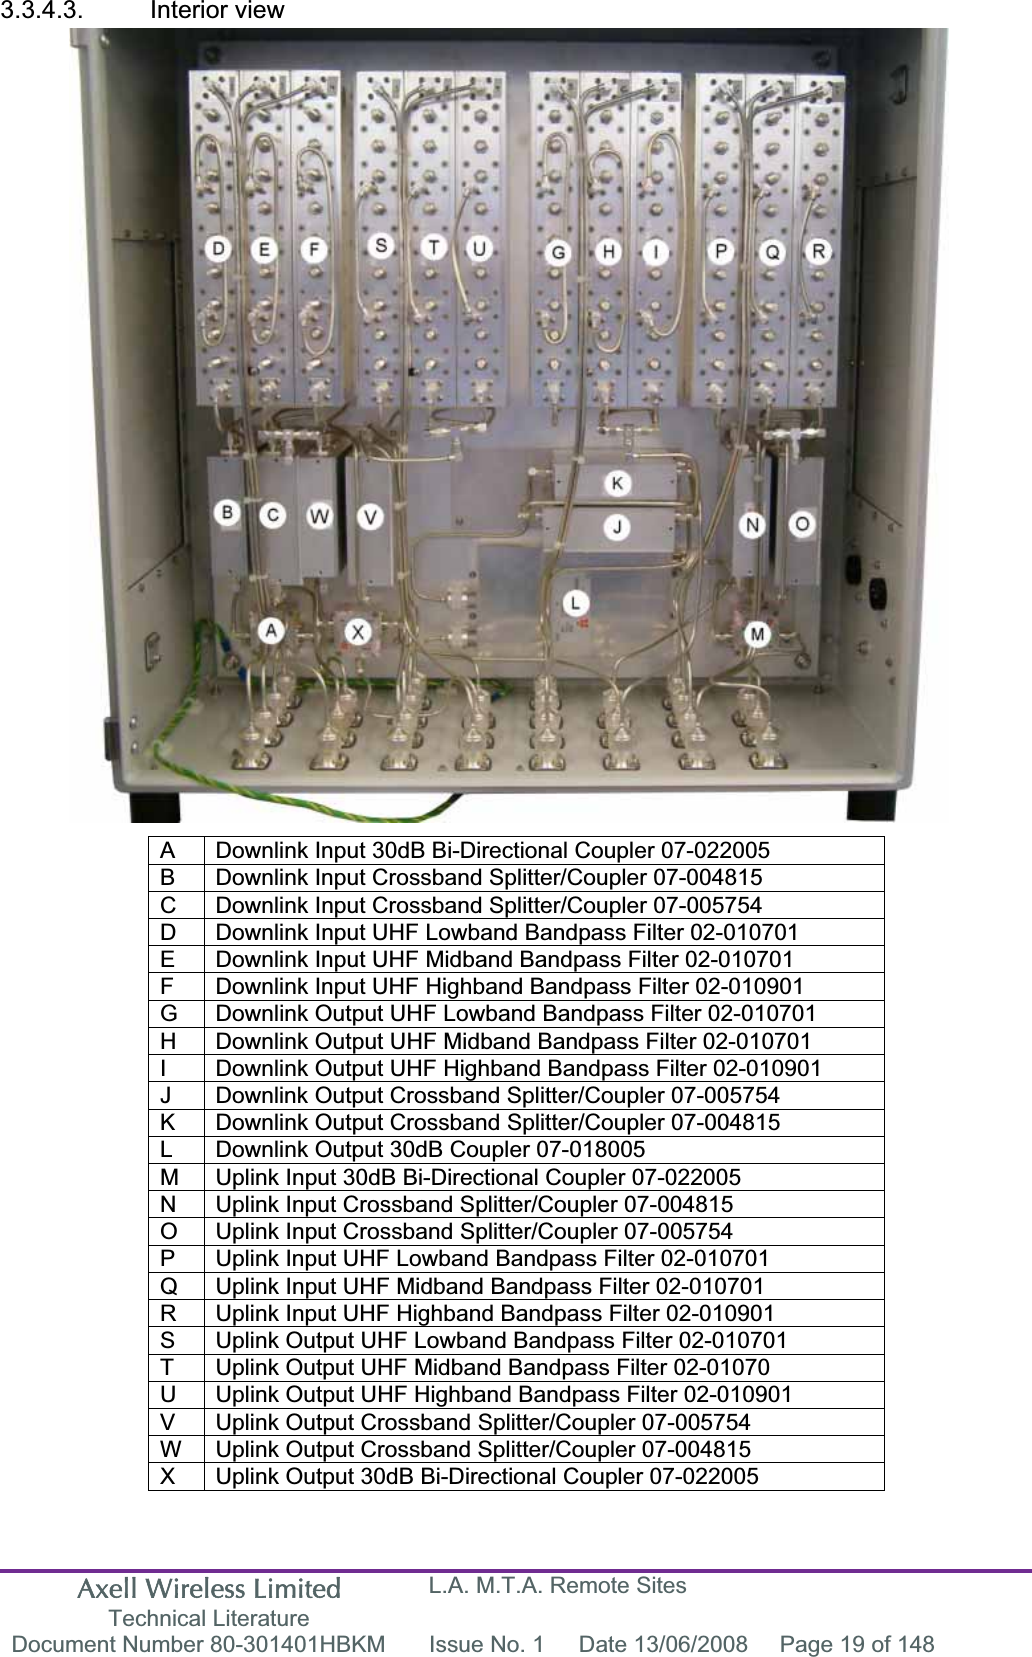 Axell Wireless Limited Technical Literature L.A. M.T.A. Remote Sites Document Number 80-301401HBKM  Issue No. 1  Date 13/06/2008  Page 19 of 148 3.3.4.3. Interior view A  Downlink Input 30dB Bi-Directional Coupler 07-022005 B  Downlink Input Crossband Splitter/Coupler 07-004815 C  Downlink Input Crossband Splitter/Coupler 07-005754 D  Downlink Input UHF Lowband Bandpass Filter 02-010701 E  Downlink Input UHF Midband Bandpass Filter 02-010701 F  Downlink Input UHF Highband Bandpass Filter 02-010901 G  Downlink Output UHF Lowband Bandpass Filter 02-010701 H  Downlink Output UHF Midband Bandpass Filter 02-010701 I  Downlink Output UHF Highband Bandpass Filter 02-010901 J  Downlink Output Crossband Splitter/Coupler 07-005754 K  Downlink Output Crossband Splitter/Coupler 07-004815 L  Downlink Output 30dB Coupler 07-018005 M  Uplink Input 30dB Bi-Directional Coupler 07-022005 N  Uplink Input Crossband Splitter/Coupler 07-004815 O  Uplink Input Crossband Splitter/Coupler 07-005754 P  Uplink Input UHF Lowband Bandpass Filter 02-010701 Q  Uplink Input UHF Midband Bandpass Filter 02-010701 R  Uplink Input UHF Highband Bandpass Filter 02-010901 S  Uplink Output UHF Lowband Bandpass Filter 02-010701 T  Uplink Output UHF Midband Bandpass Filter 02-01070 U  Uplink Output UHF Highband Bandpass Filter 02-010901 V  Uplink Output Crossband Splitter/Coupler 07-005754 W  Uplink Output Crossband Splitter/Coupler 07-004815 X  Uplink Output 30dB Bi-Directional Coupler 07-022005 